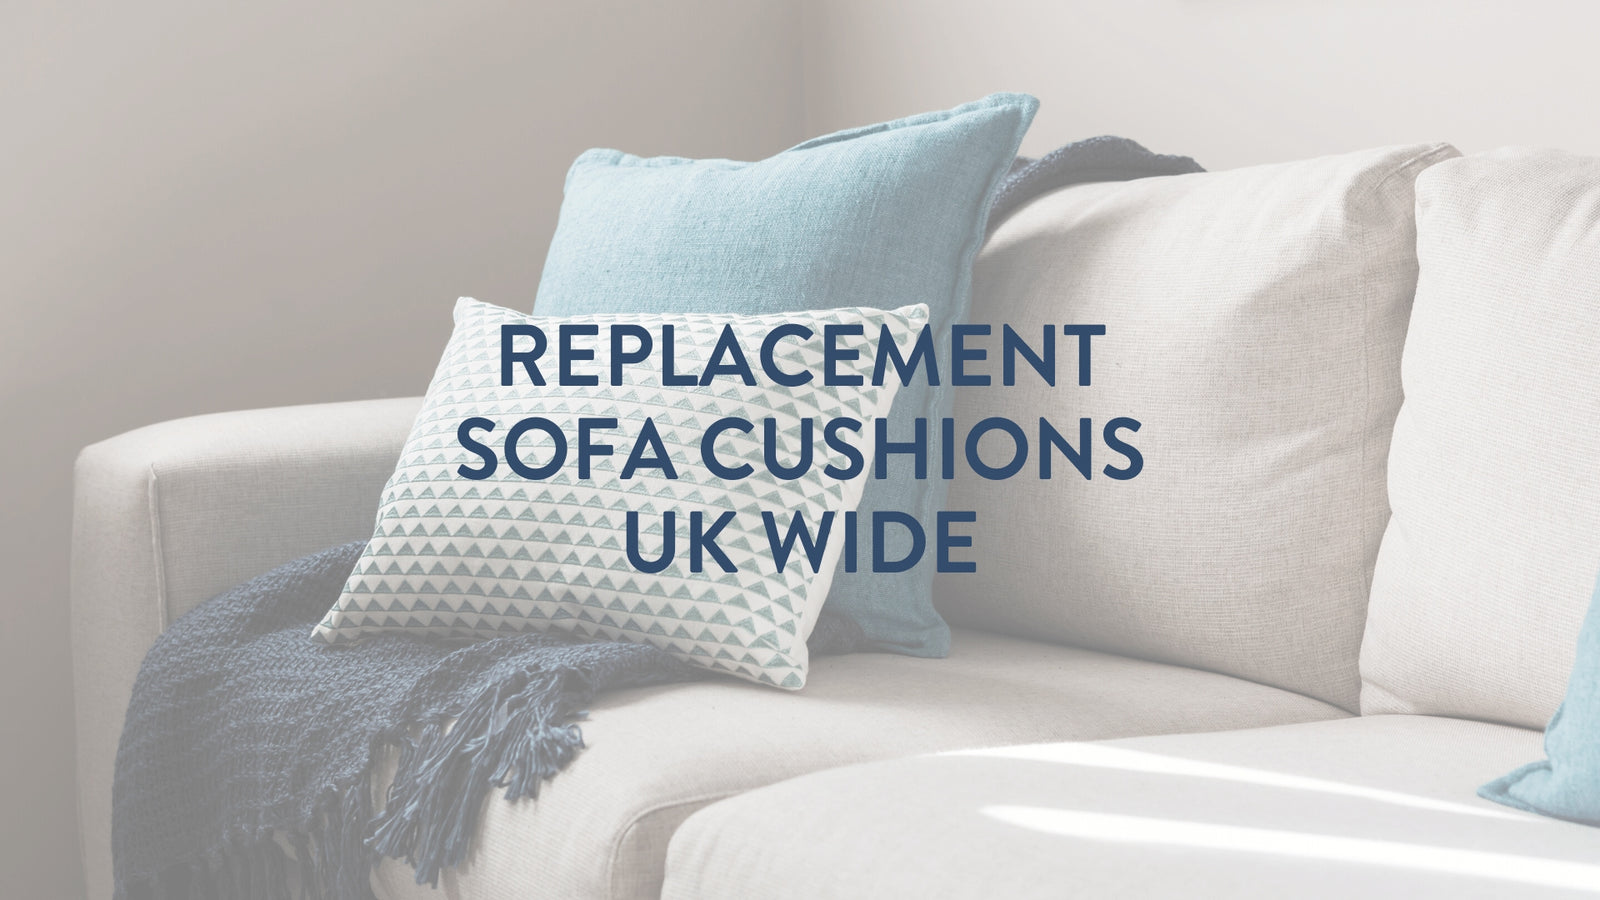 replacement sofa cushions UK wide service next day Putnams 